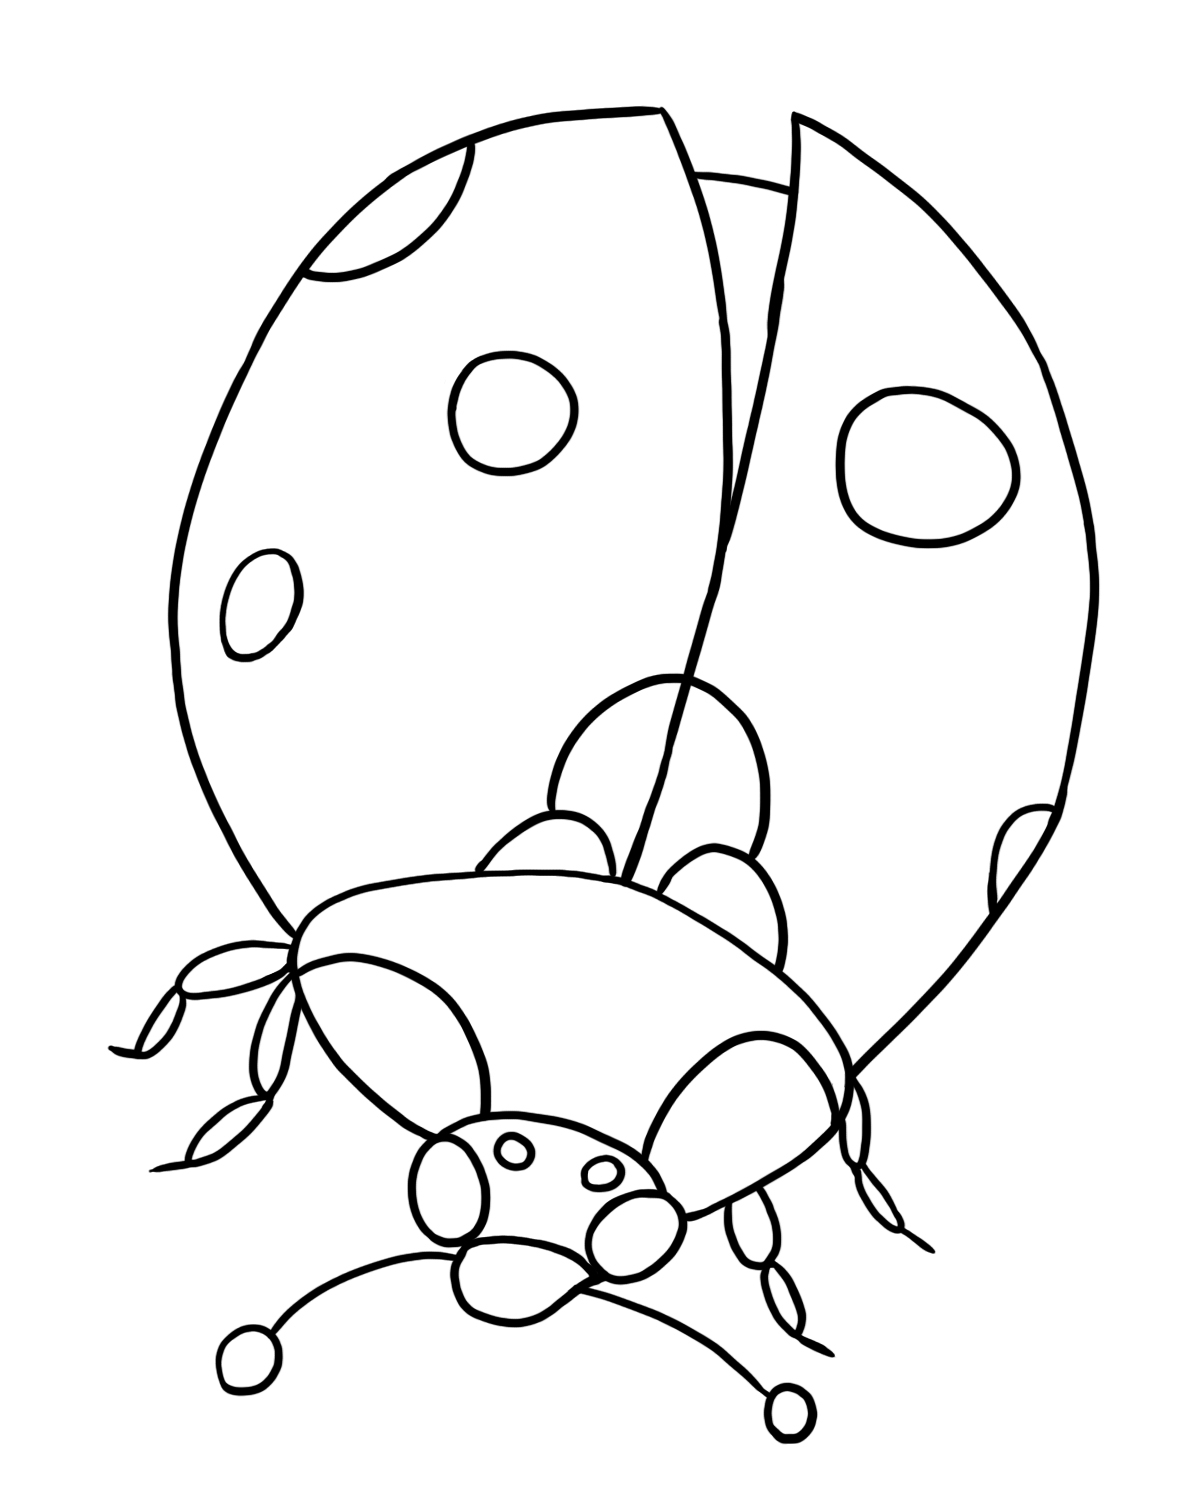  Bug Insect Coloring Pages for Adult